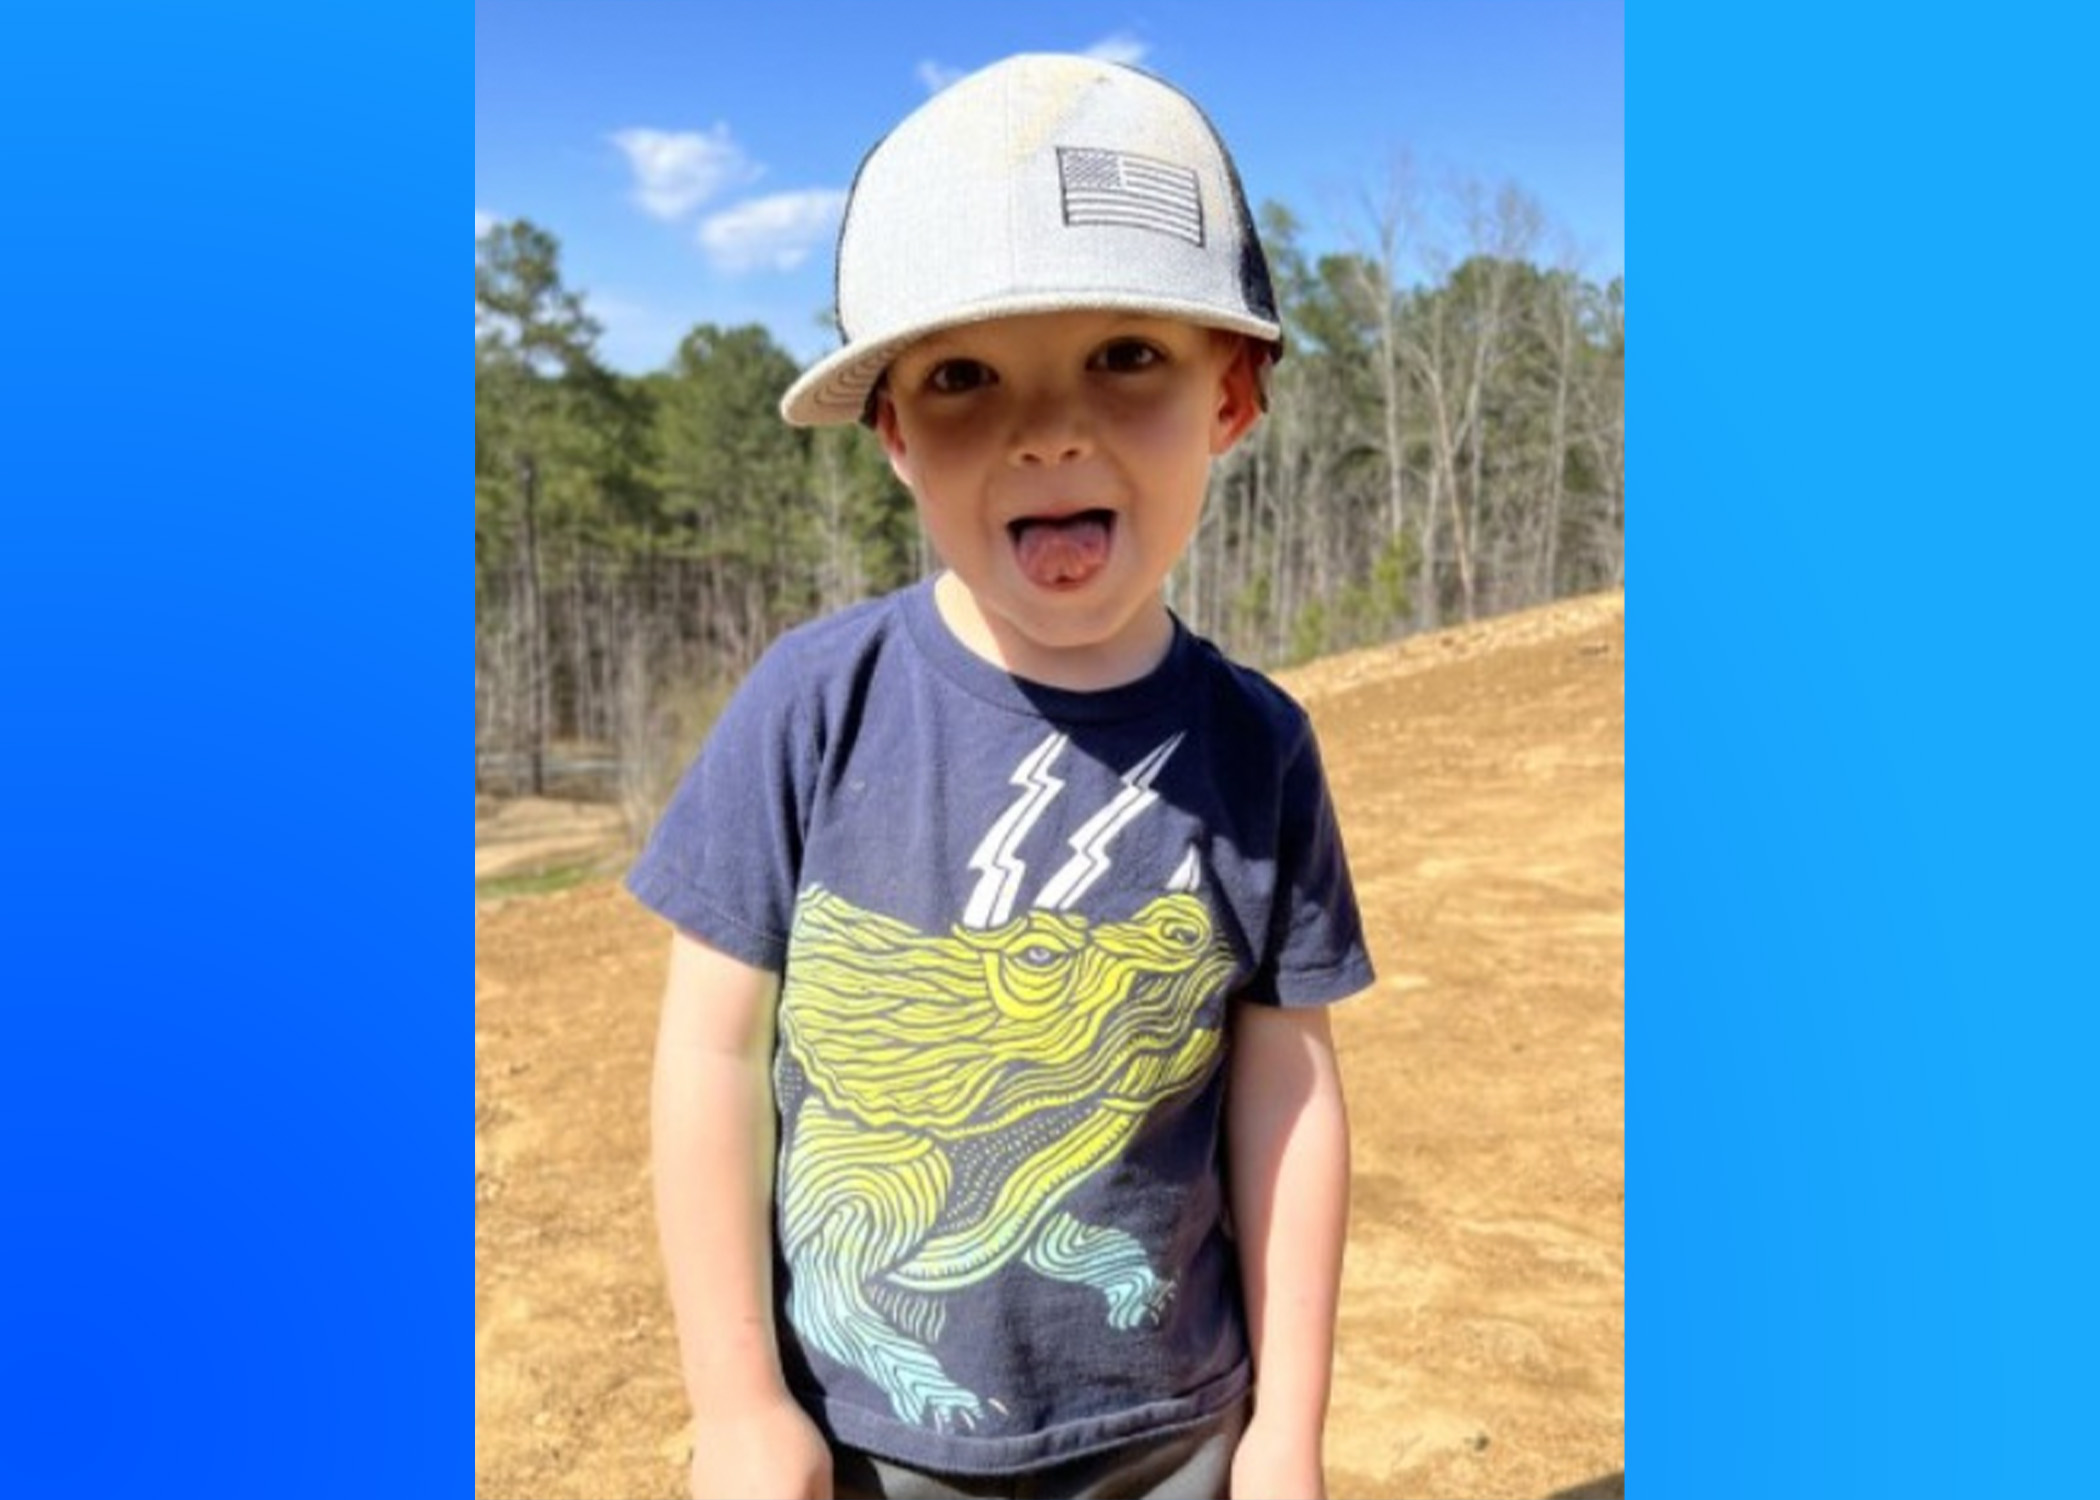 Obituary: Riley Collier Wilson (December 18, 2017 ~ May 2, 2022)